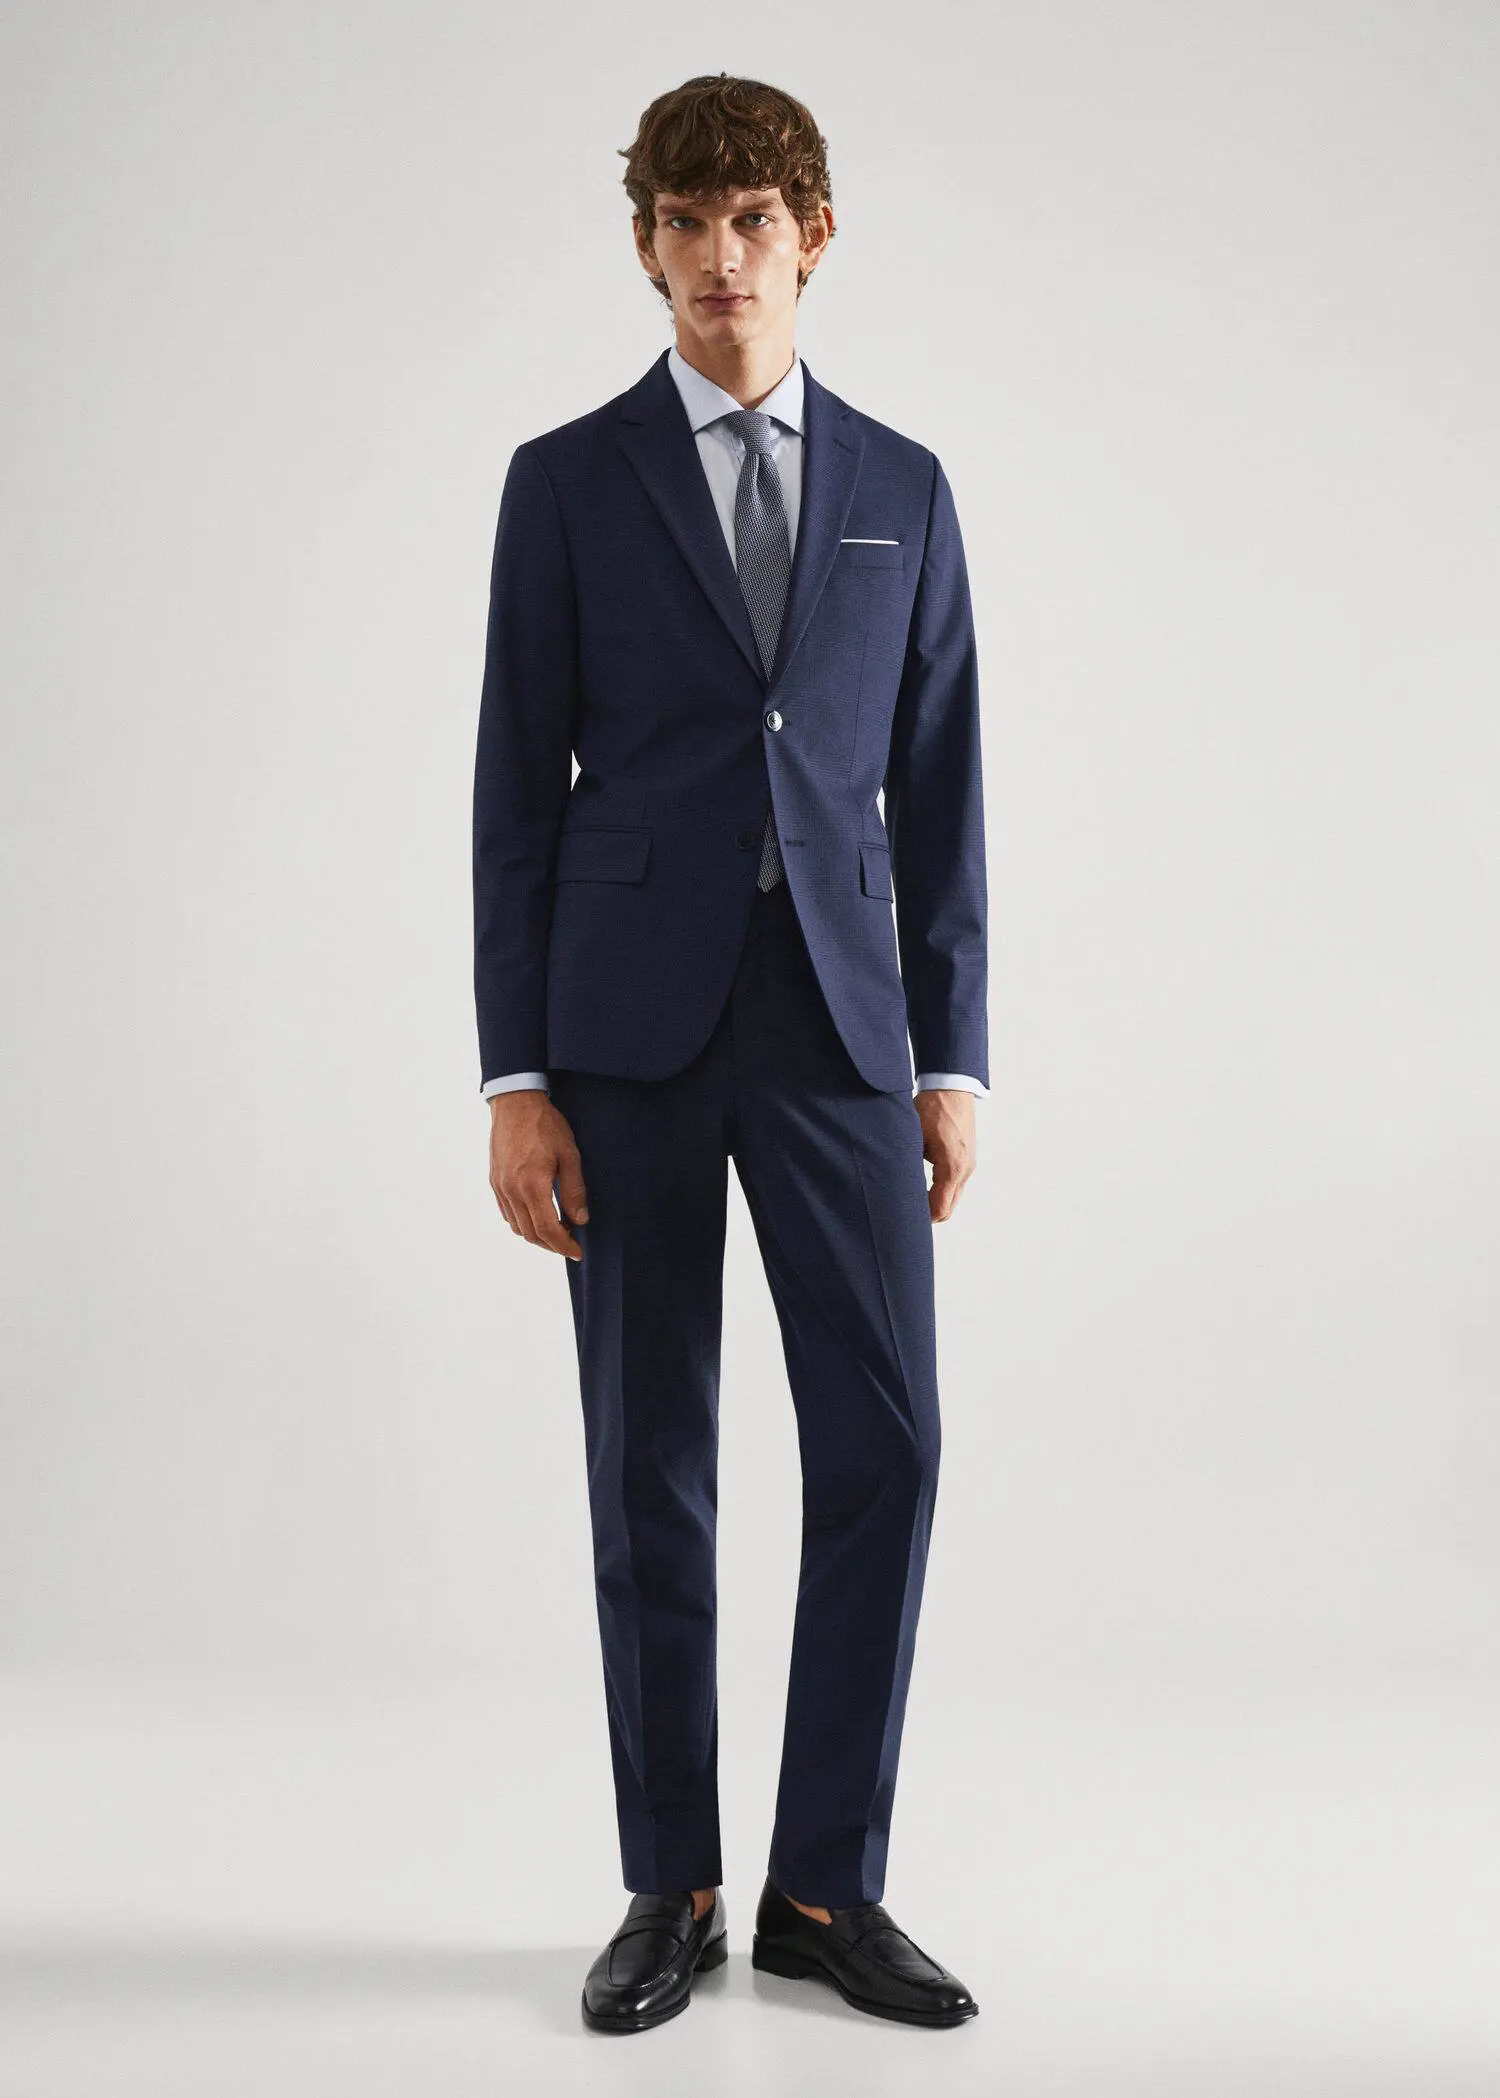 Mango Slim-fit check wool suit blazer. a man wearing a suit and tie standing in a room. 